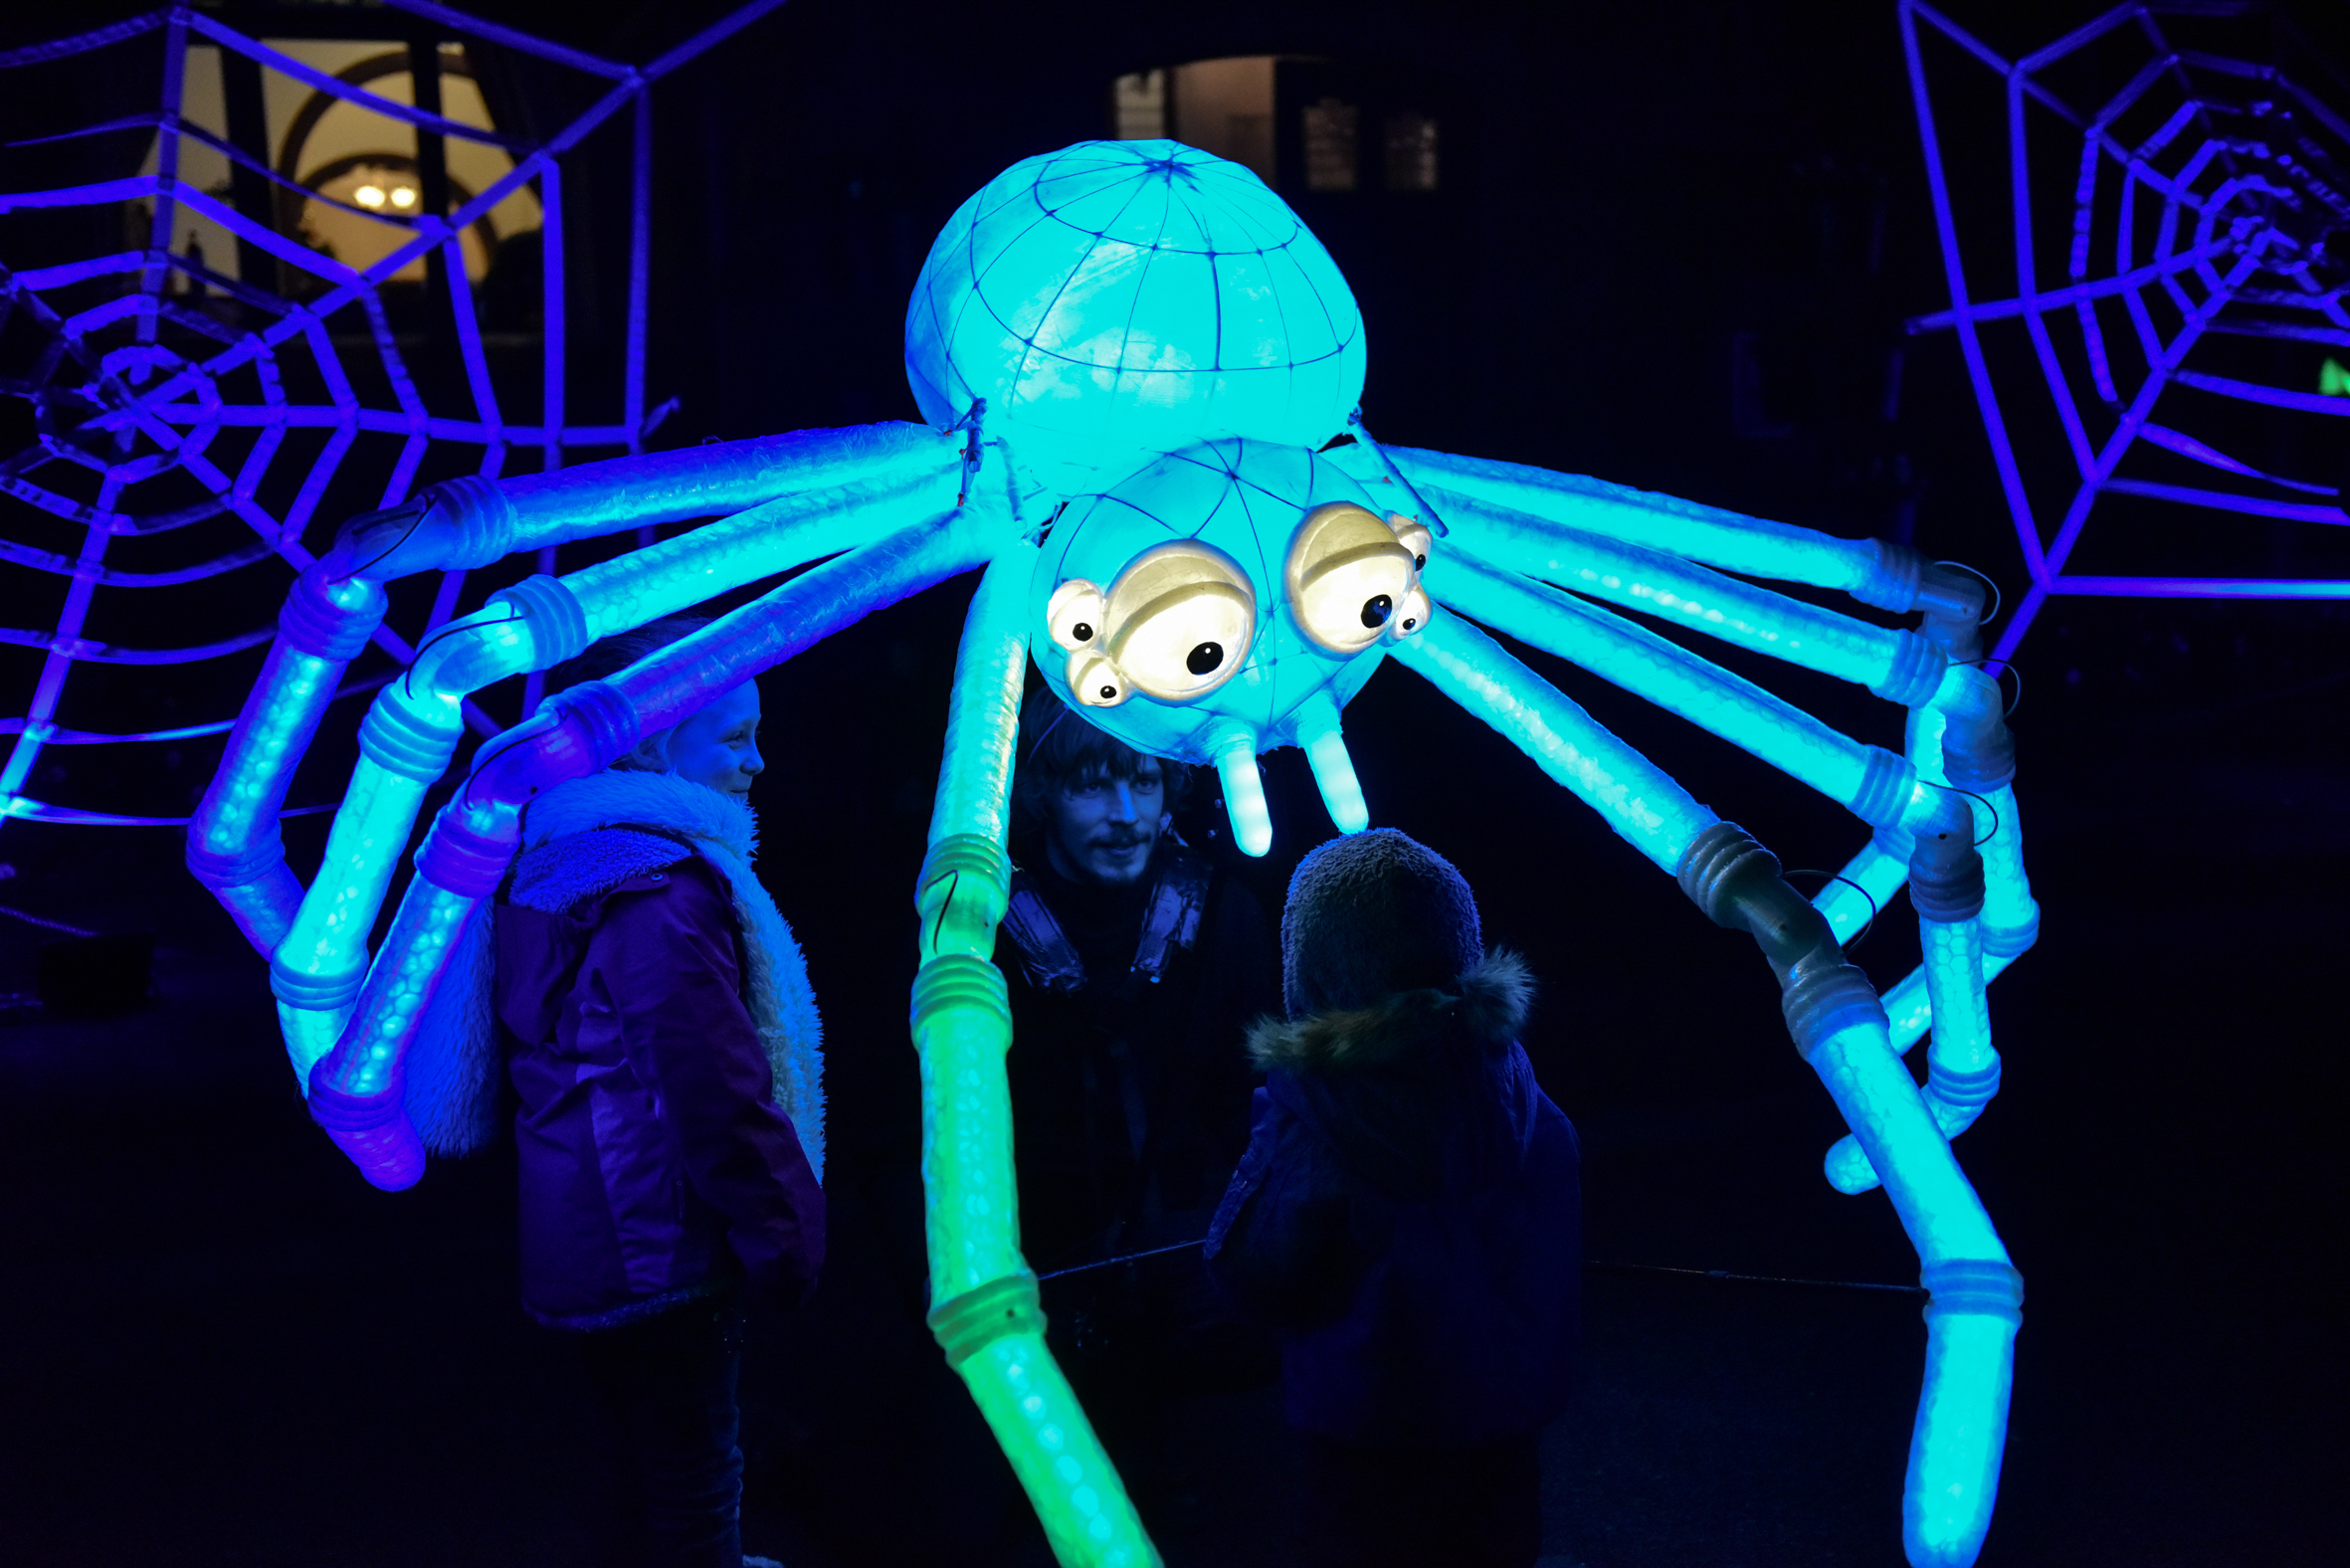 The Monster Halloween Ball at Sefton Park Palm House, 24 - 26 October 2018